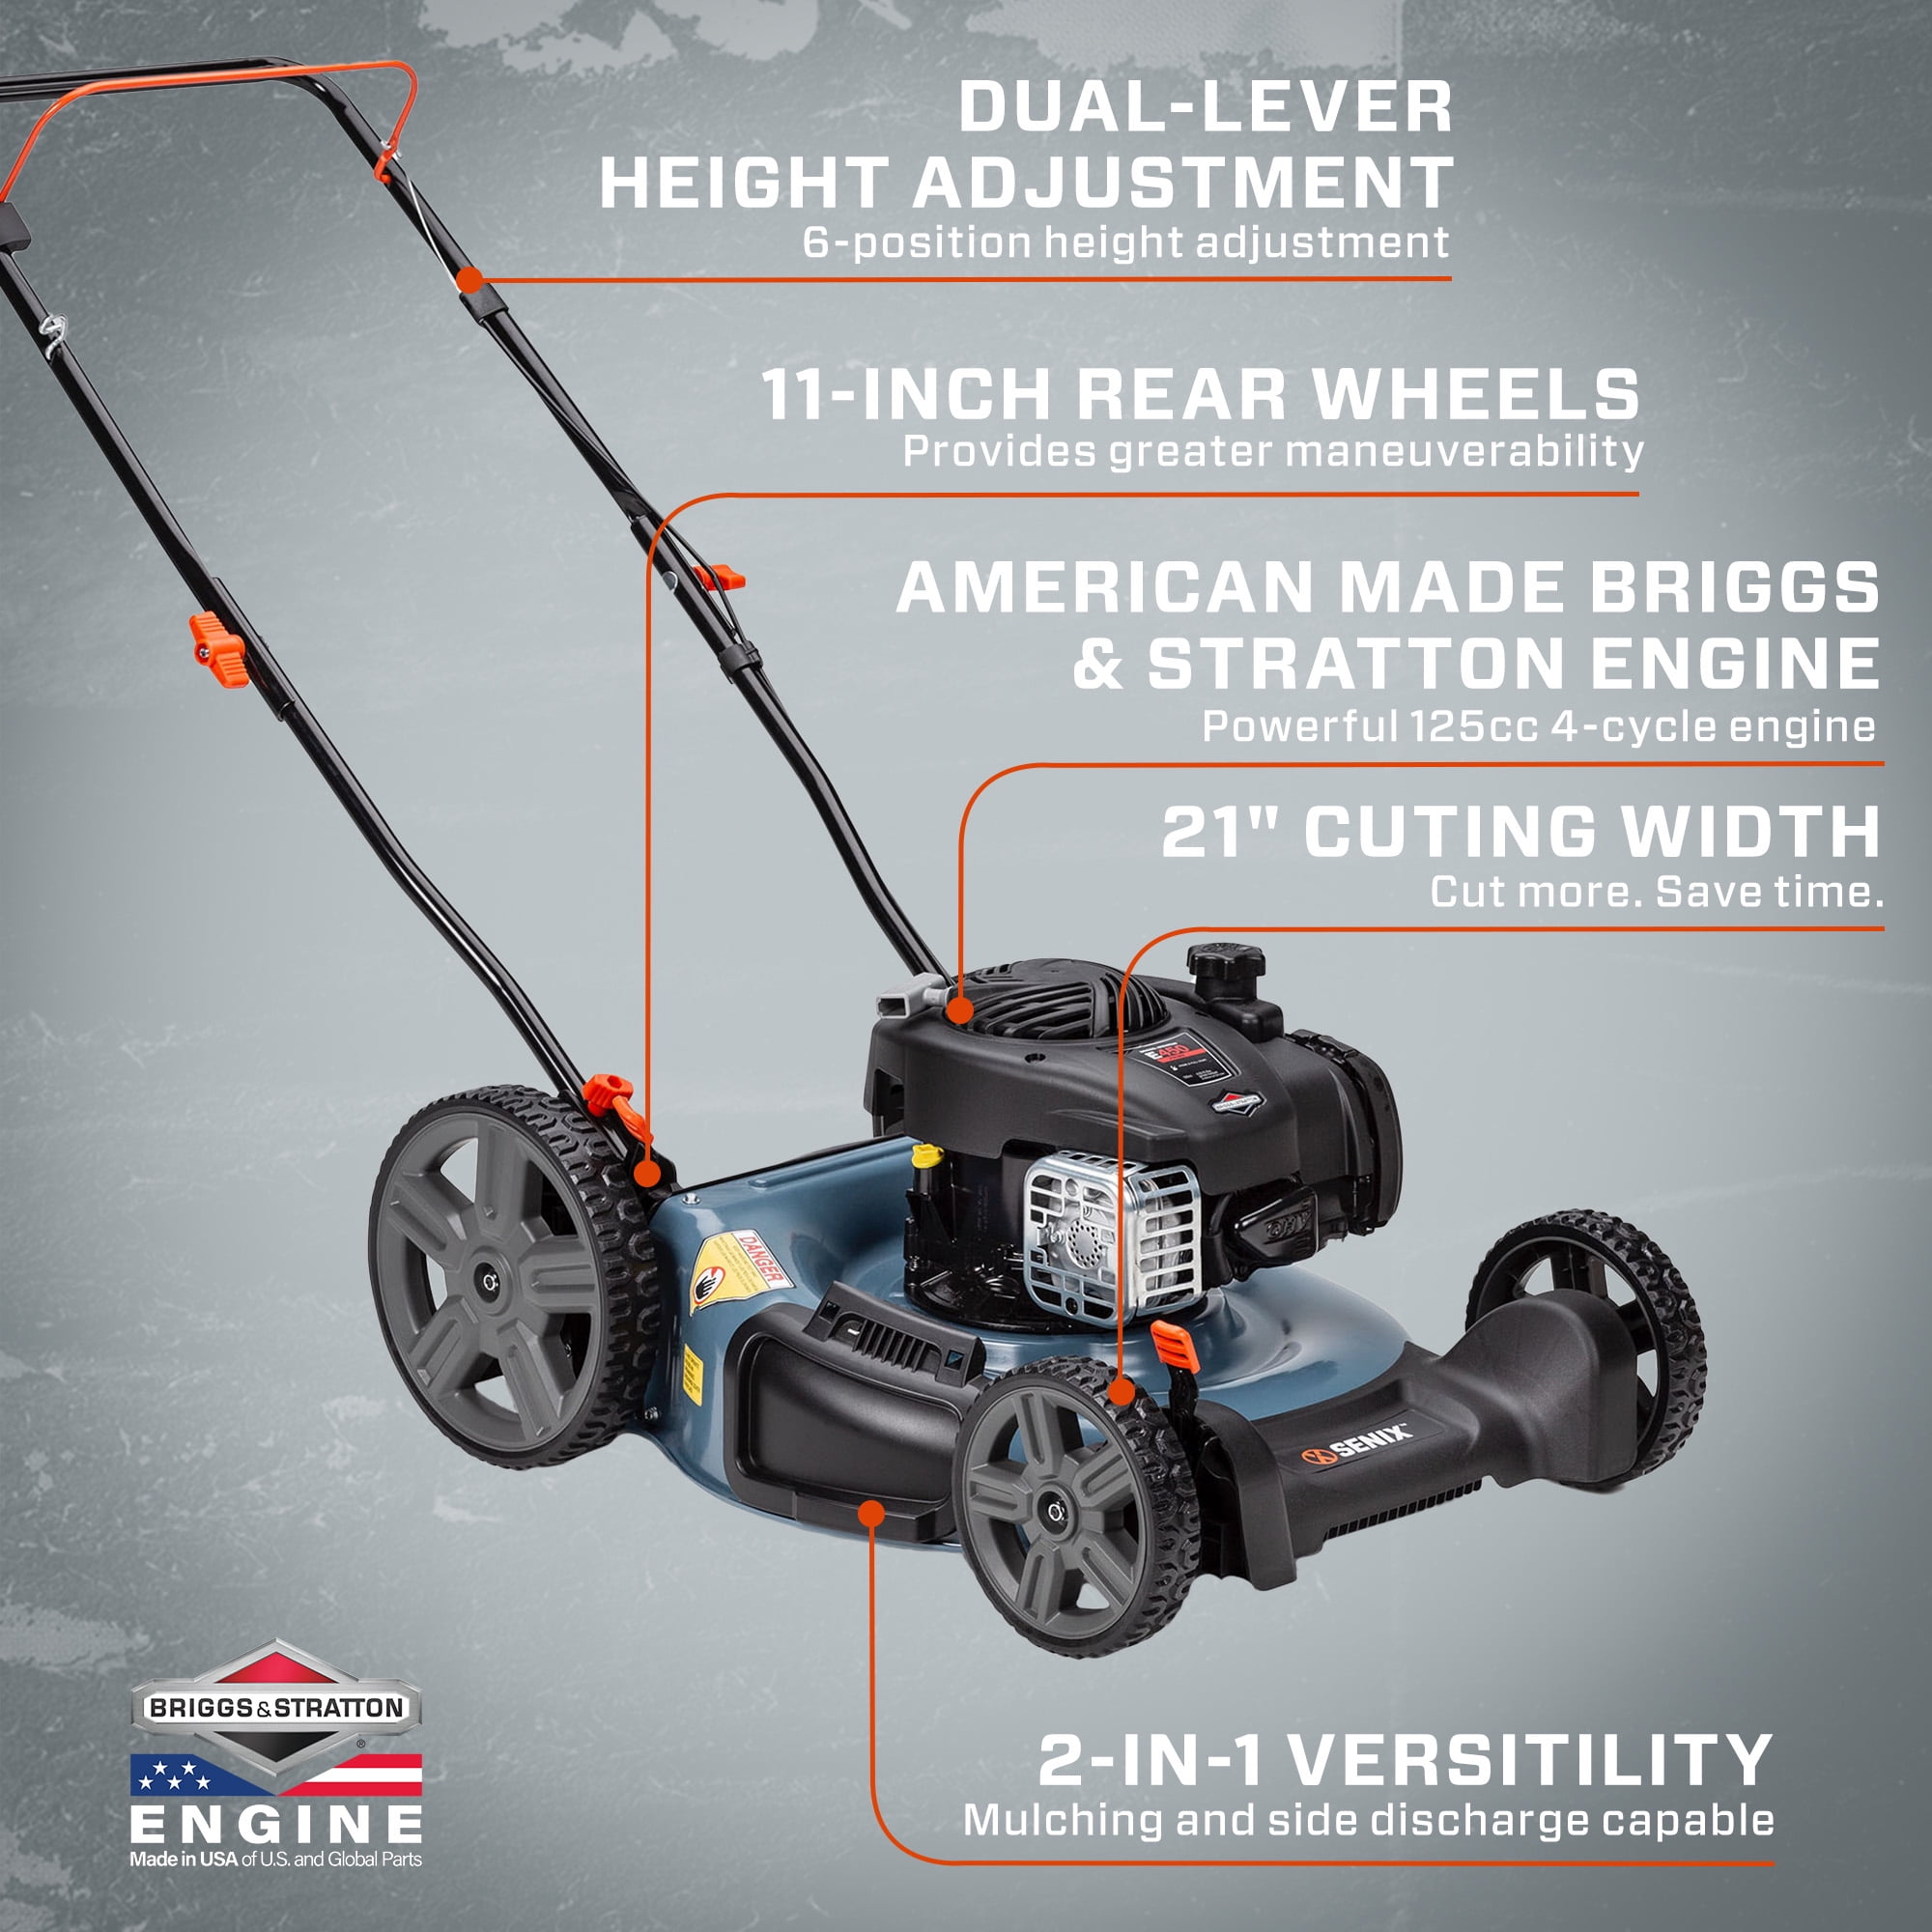 SENIX 21-Inch Gas Lawn Mower, 125 cc 4-Cycle Briggs & Stratton Engine, 2-In-1 Push Lawnmower, 6-Position Height Adjustment with 11-Inch Rear Wheels, LSPG-M4